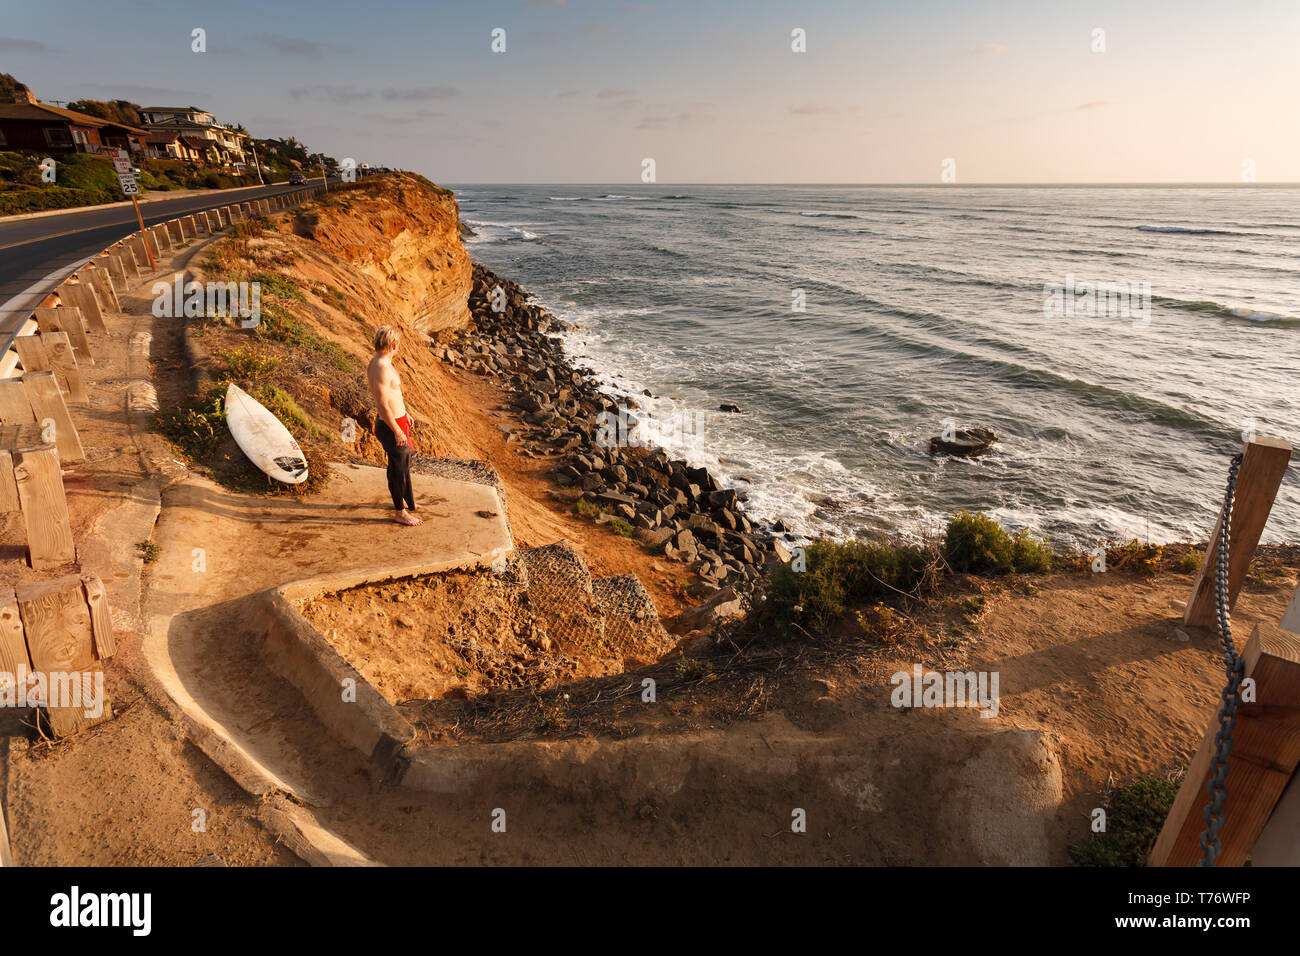 Surfer stands on cliffs above surf to watch breaks in San Diego, California Stock Photo